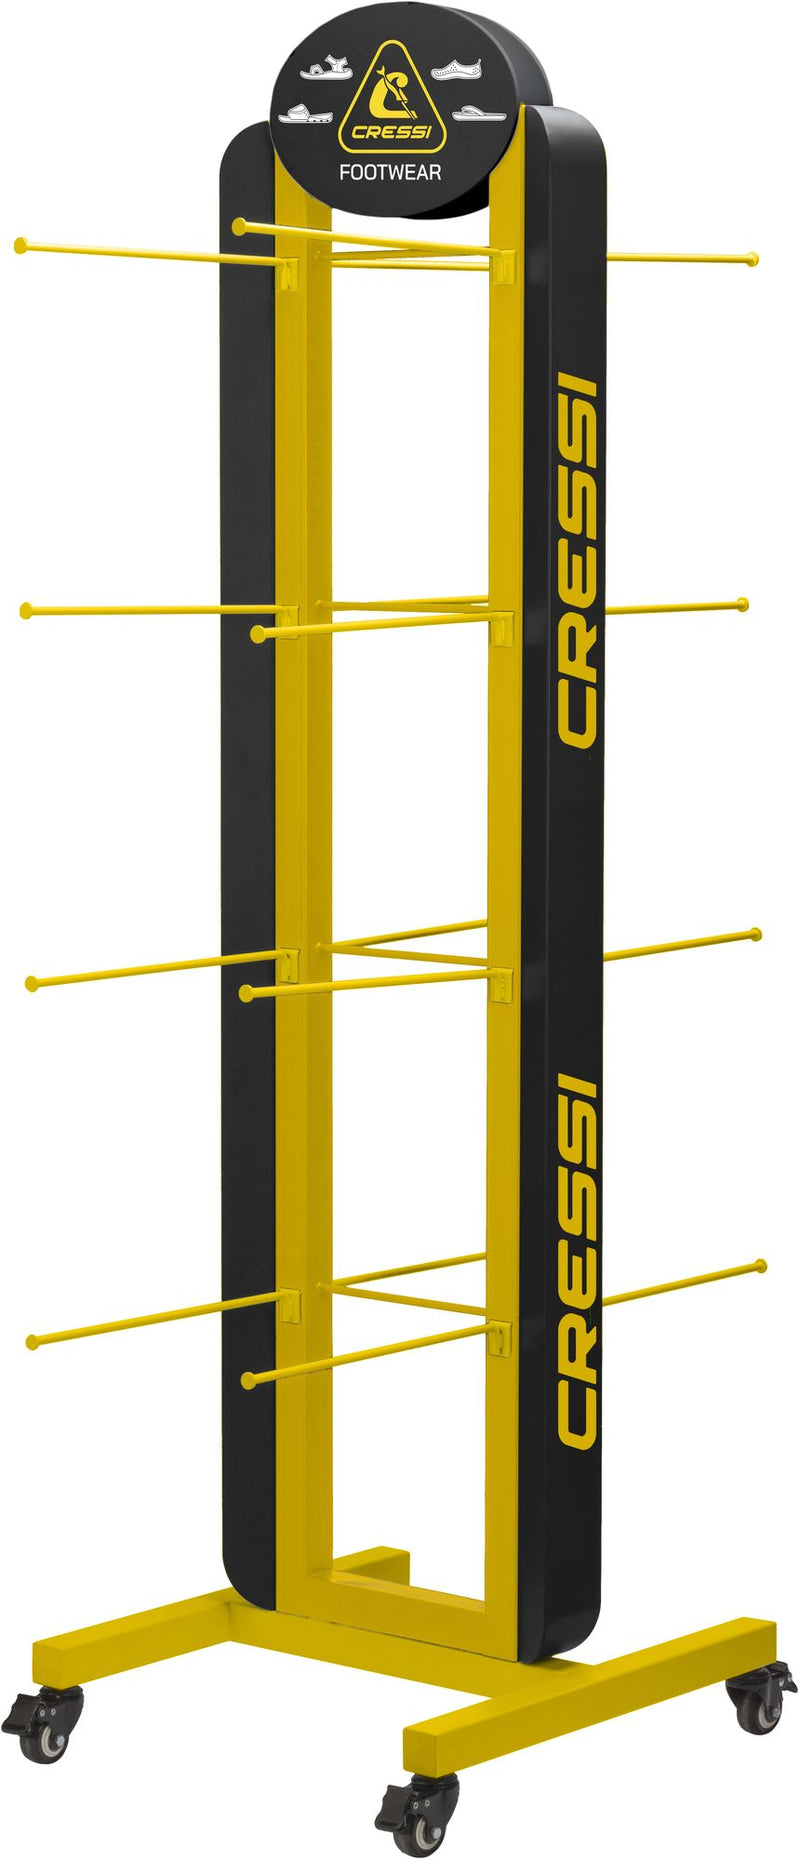 Cressi Footwear Display With Wheels espositore per calzature con ruote spiaggia immersion subacque apnea nuoto pesca espositor support scuba diving spearfishing freediving snorkeling & beach paddling swimming display store support stand product display